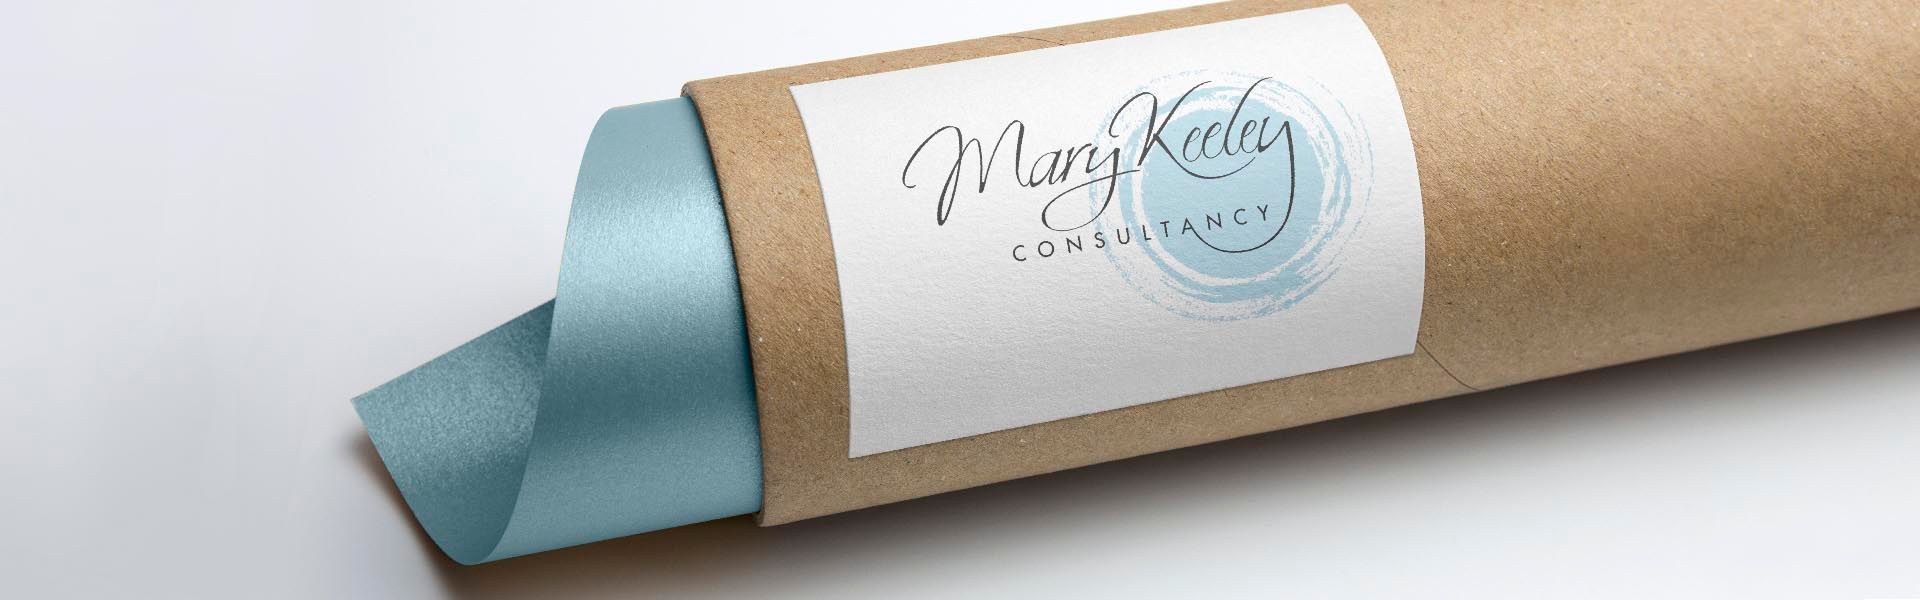 a roll of paper that says mary keeley consultancy on it